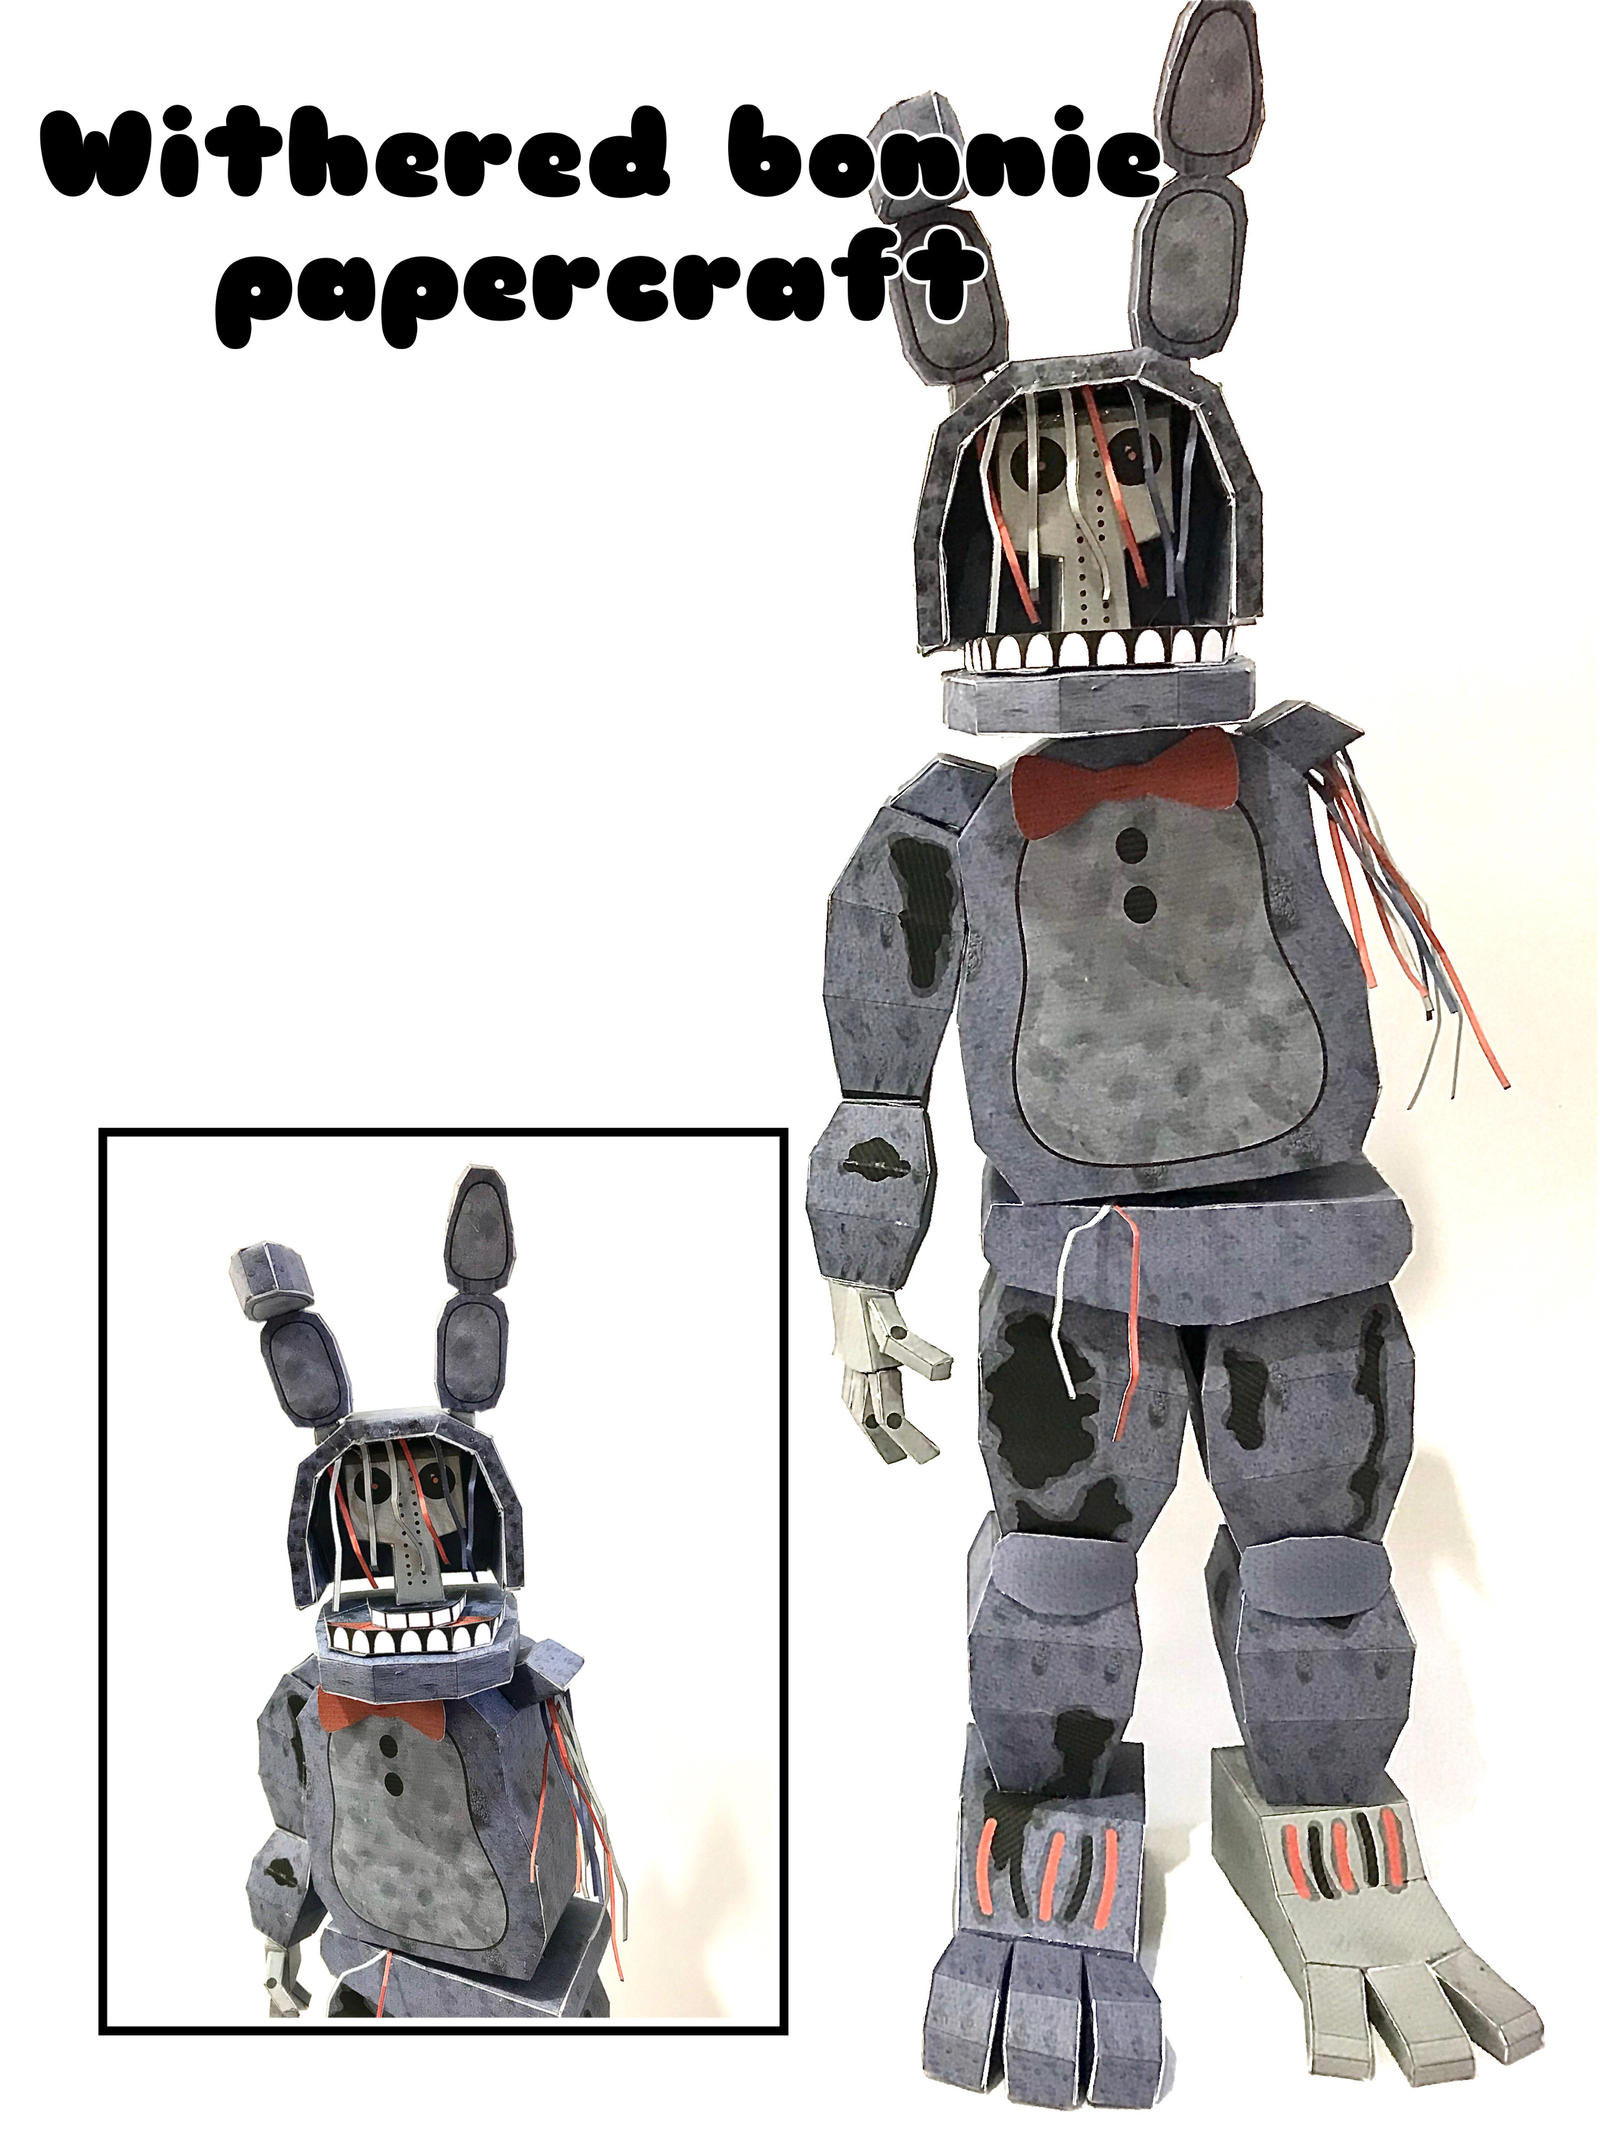 Withered bonnie plush papercraft by Helpysfunpaper on DeviantArt